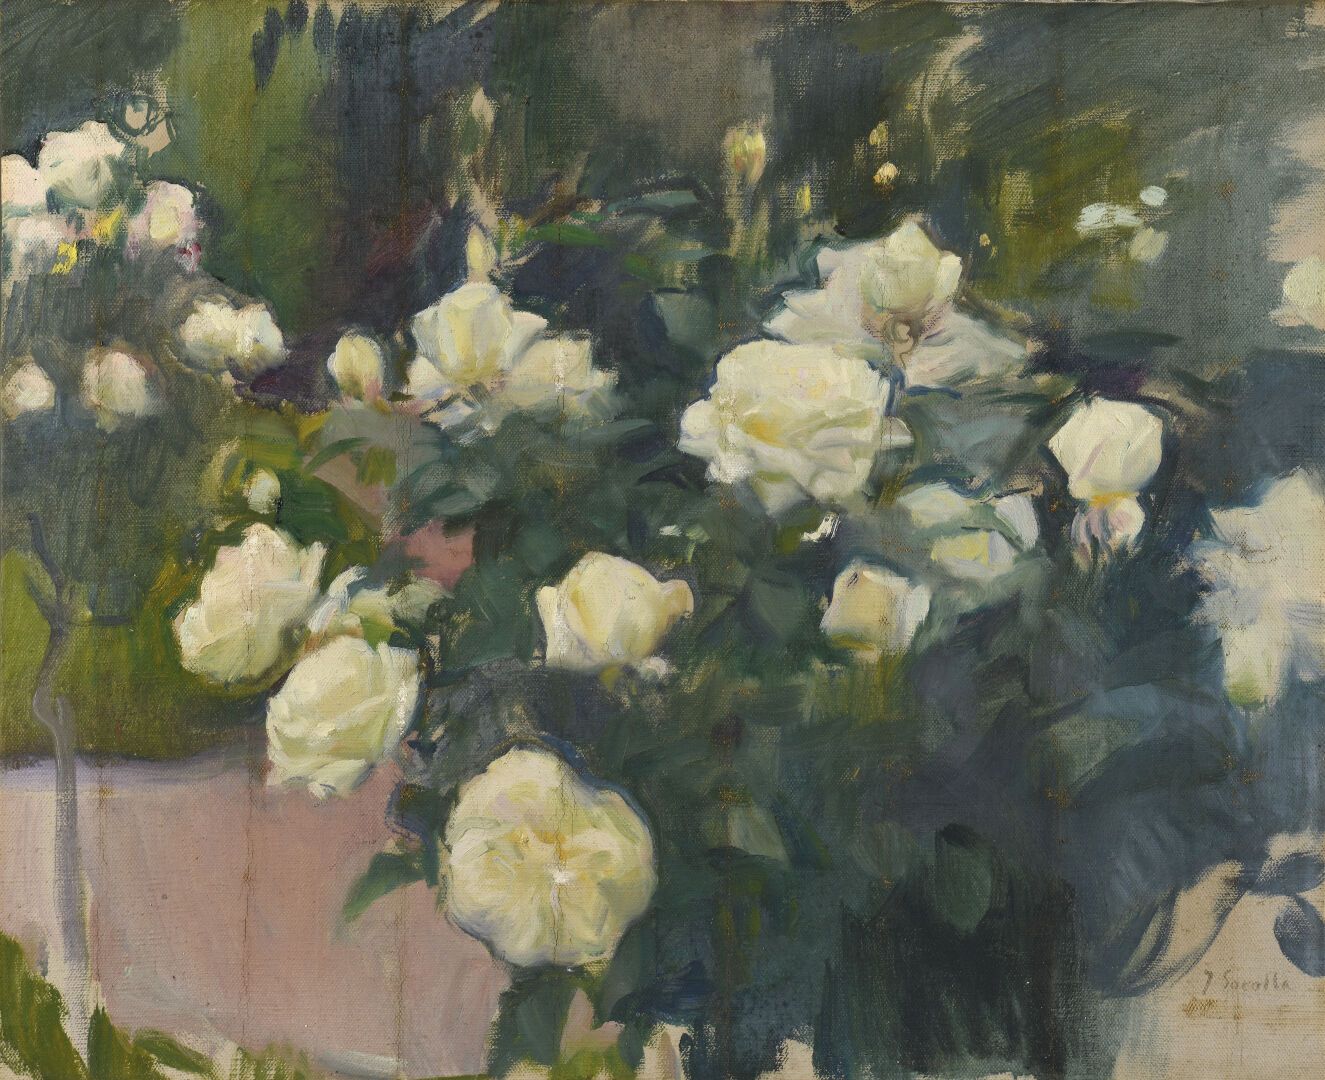 Null Joaquin SOROLLA Y BASTIDA (1863-1923)
The white roses, 1916-1919
Oil on can&hellip;